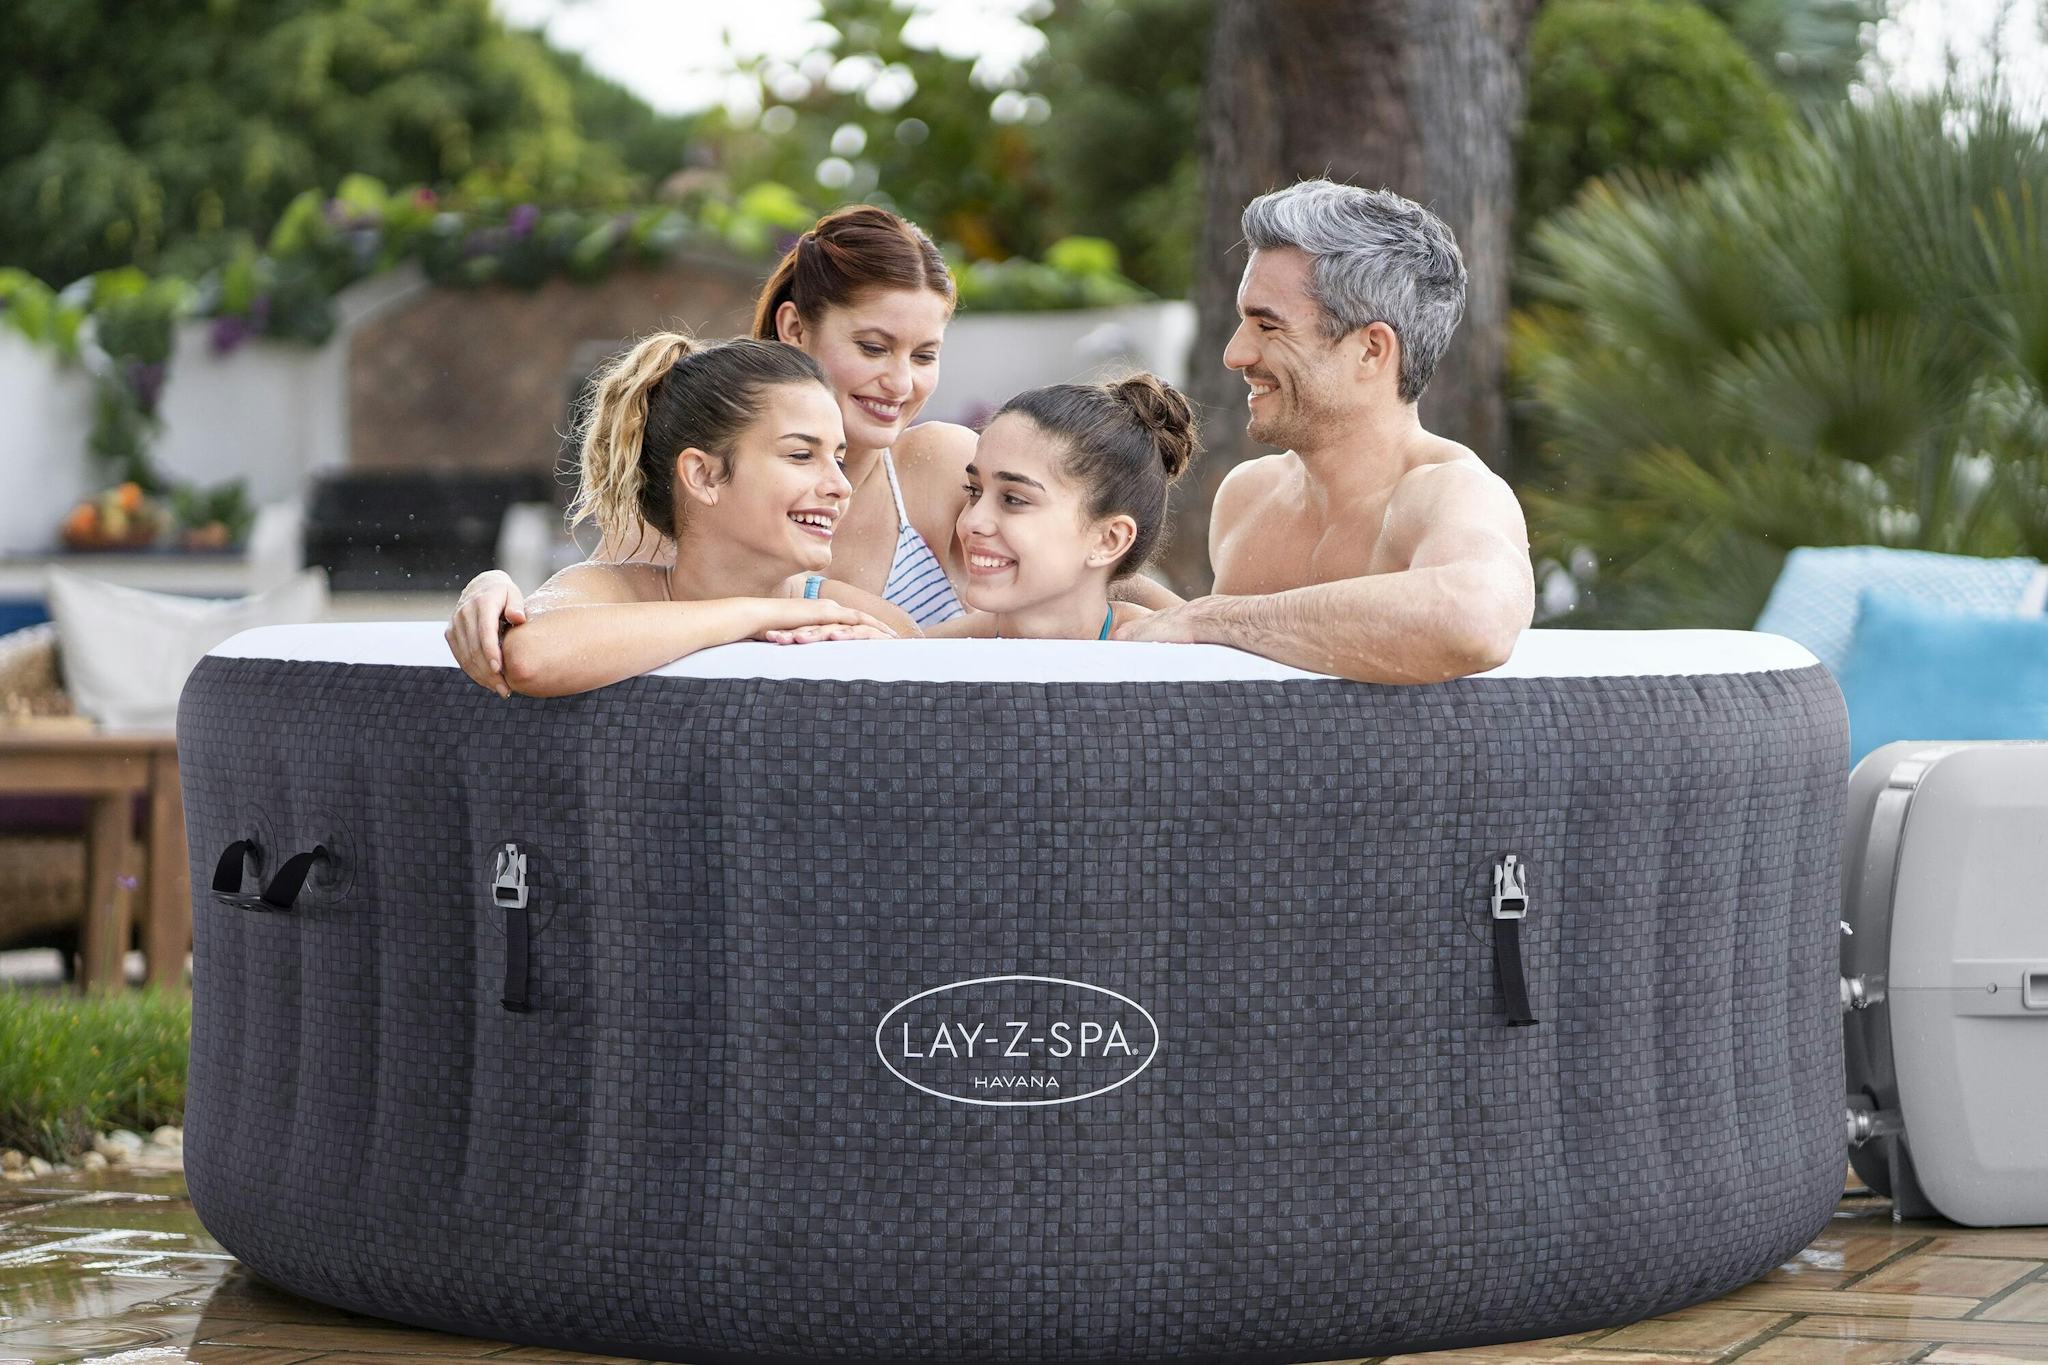 Spas Gonflables Spa gonflable rond Lay-Z-Spa Havana Airjet™ 2 - 4 personnes Bestway 7